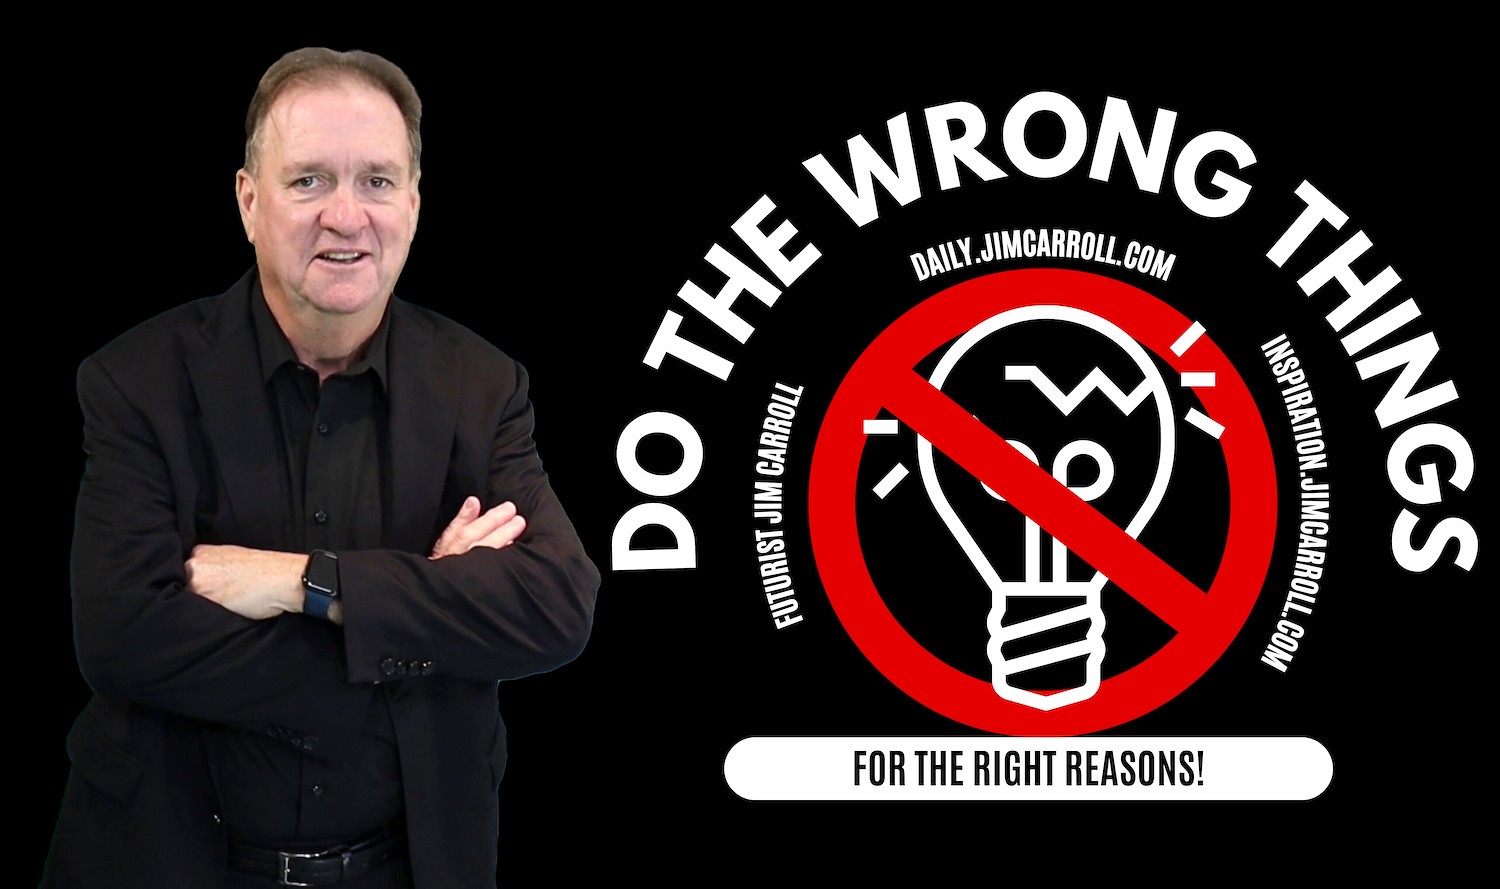 "Do the wrong things for the right reasons!"- Futurist Jim Carroll